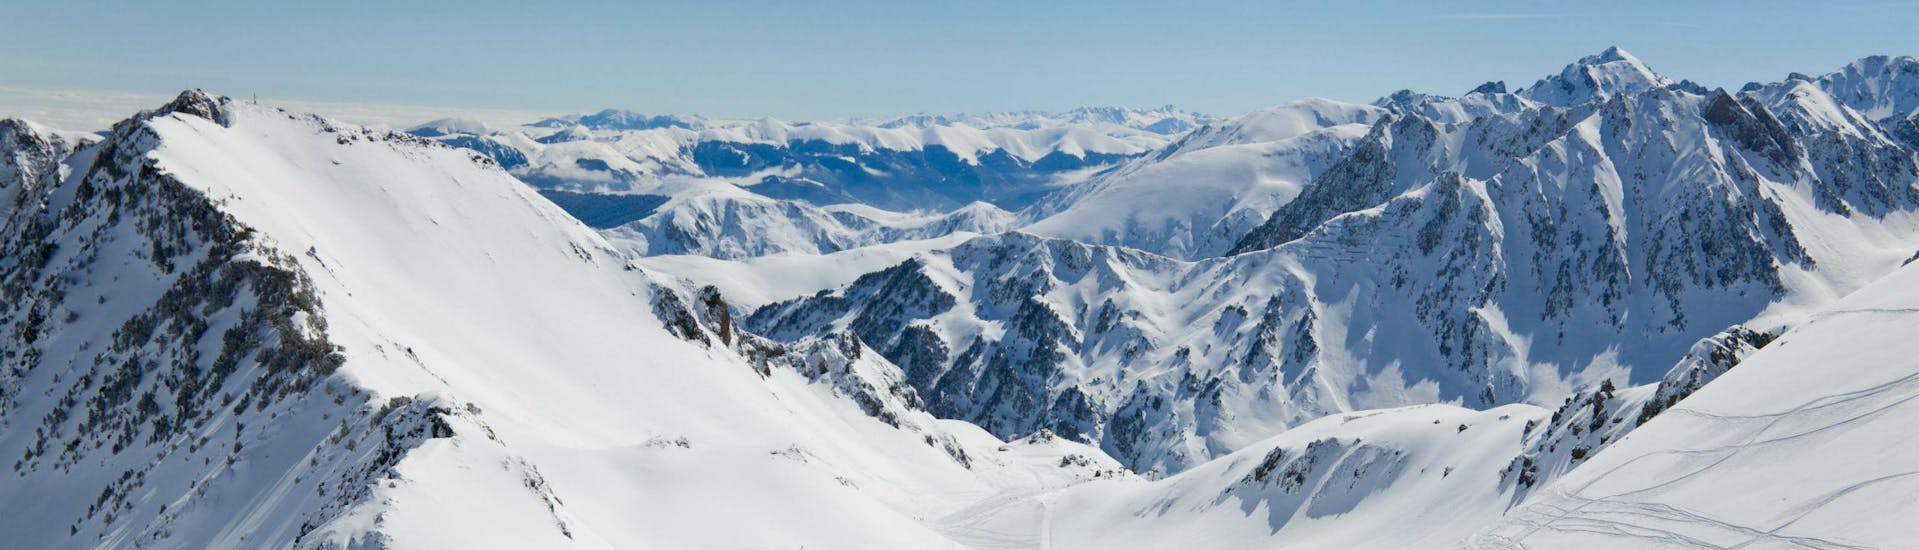 A snowboarder is admiring the stunning view of the snow-capped Pyrenees from one of the ski slopes in La Mongie - Tourmalet, where local ski schools offer a range of different ski lessons.